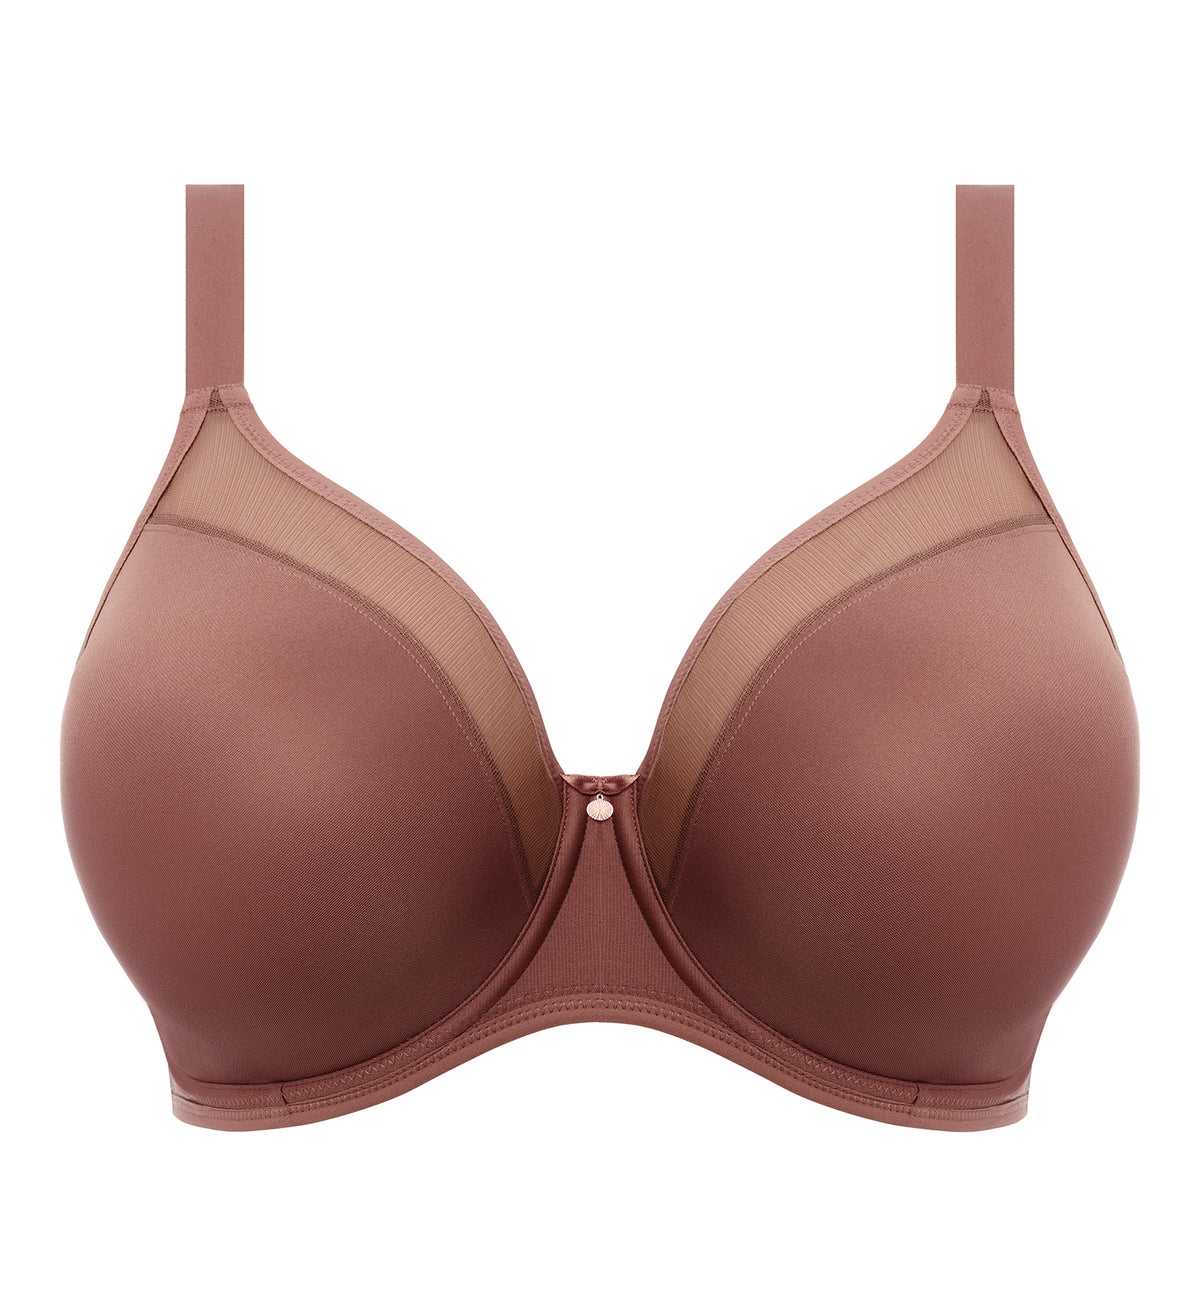 Elomi Smooth Unlined Underwire Molded Bra (4301),32GG,Clove - Clove,32GG